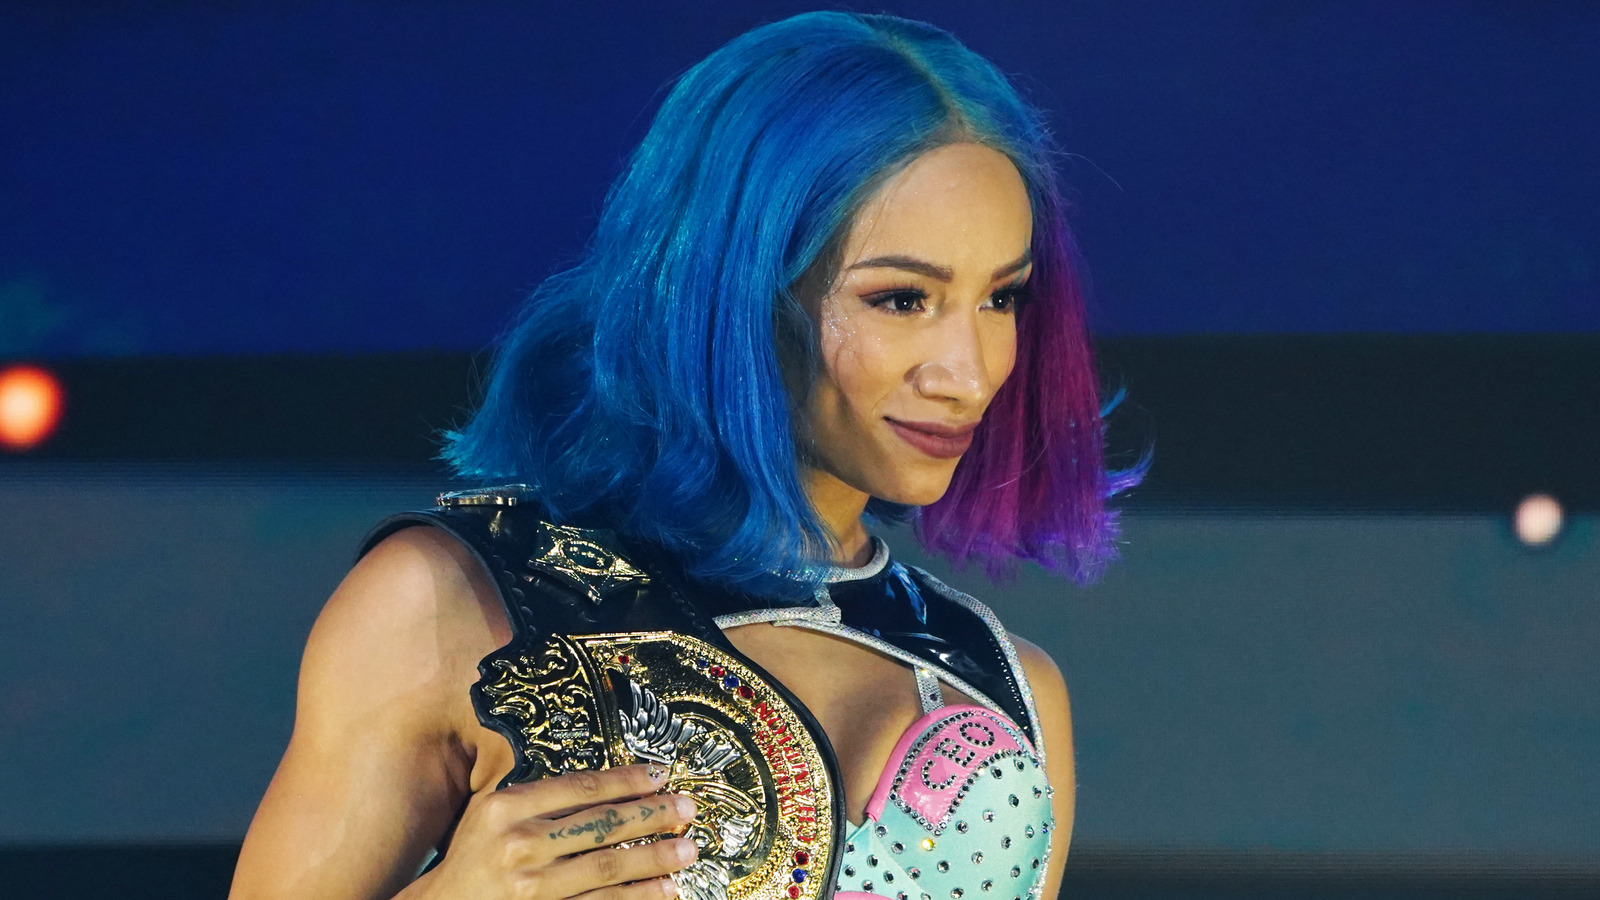 'WWE World Champion' Mercedes Mone To Present At Award Show Ahead Of Reported AEW Debut